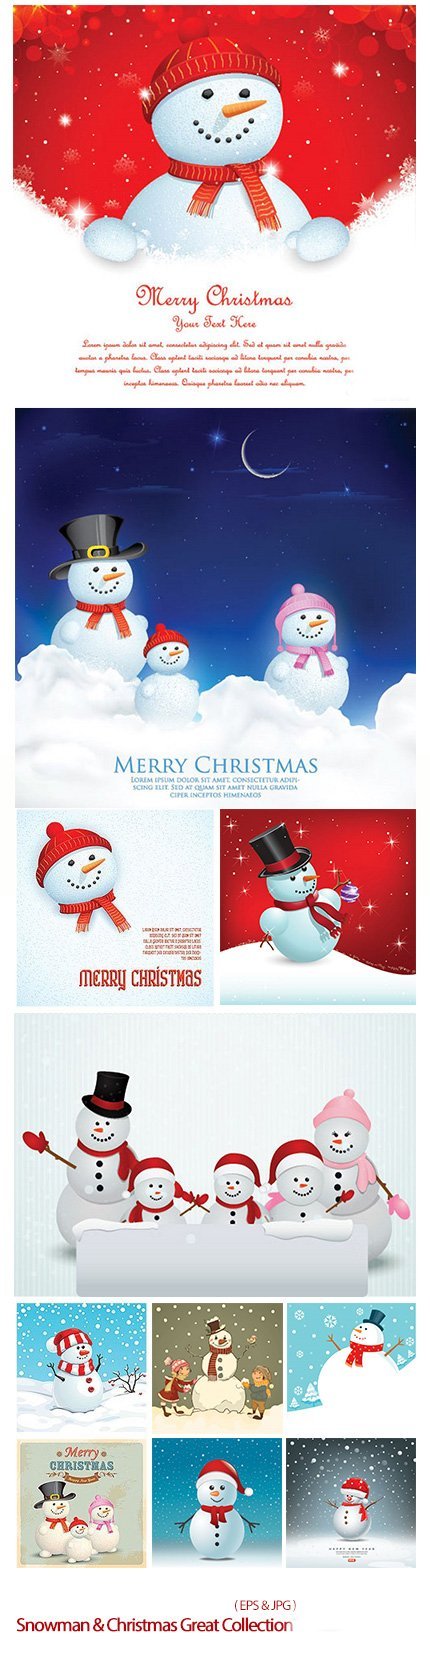 Shutterstock Snowman And Christmas Great Collection